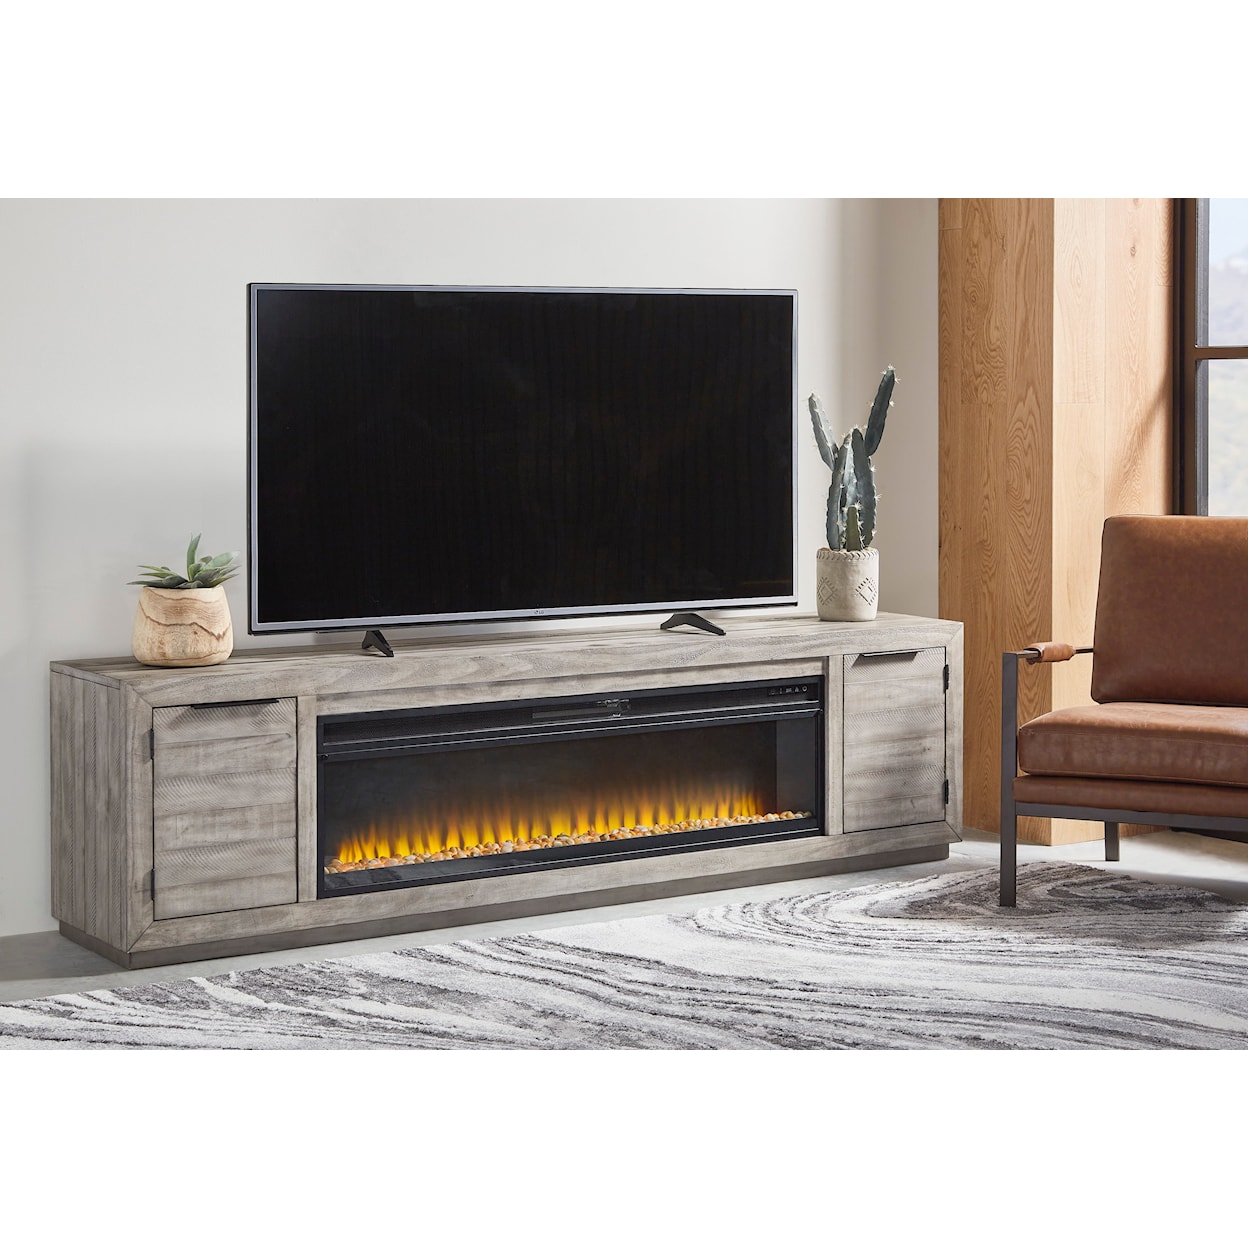 Michael Alan Select Naydell 92" TV Stand with Electric Fireplace